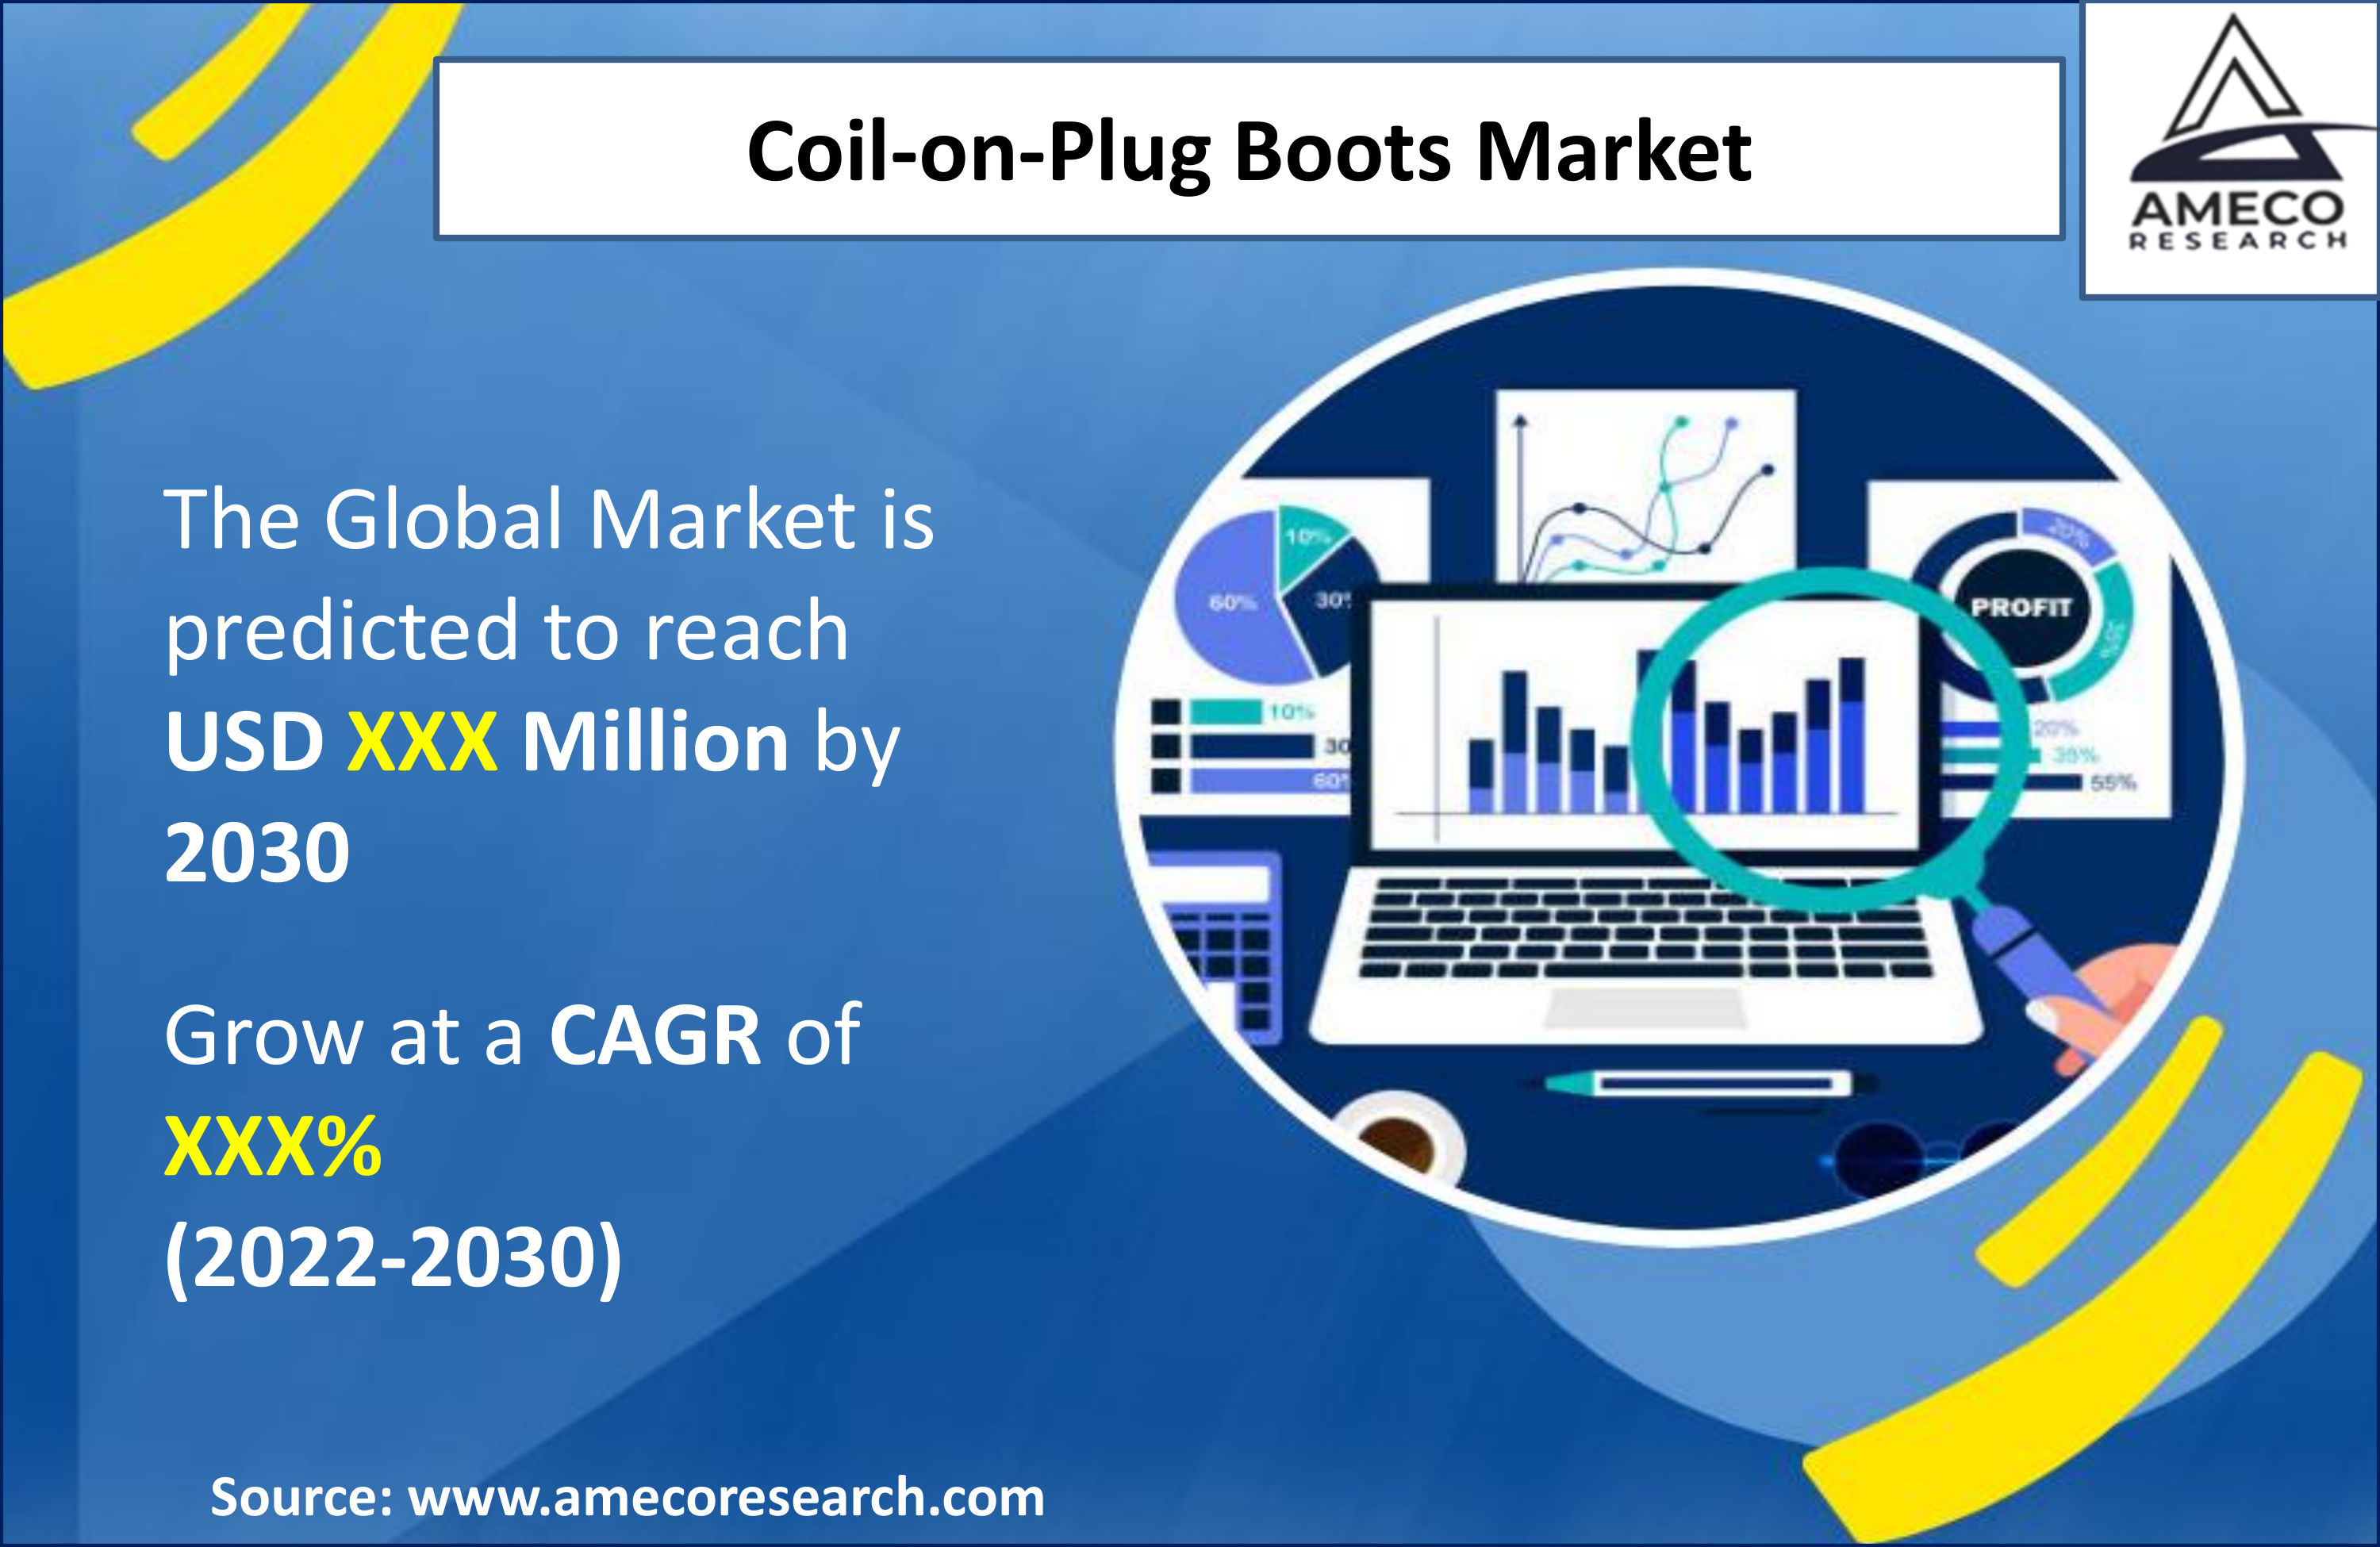 Coil-on-Plug Boots Market